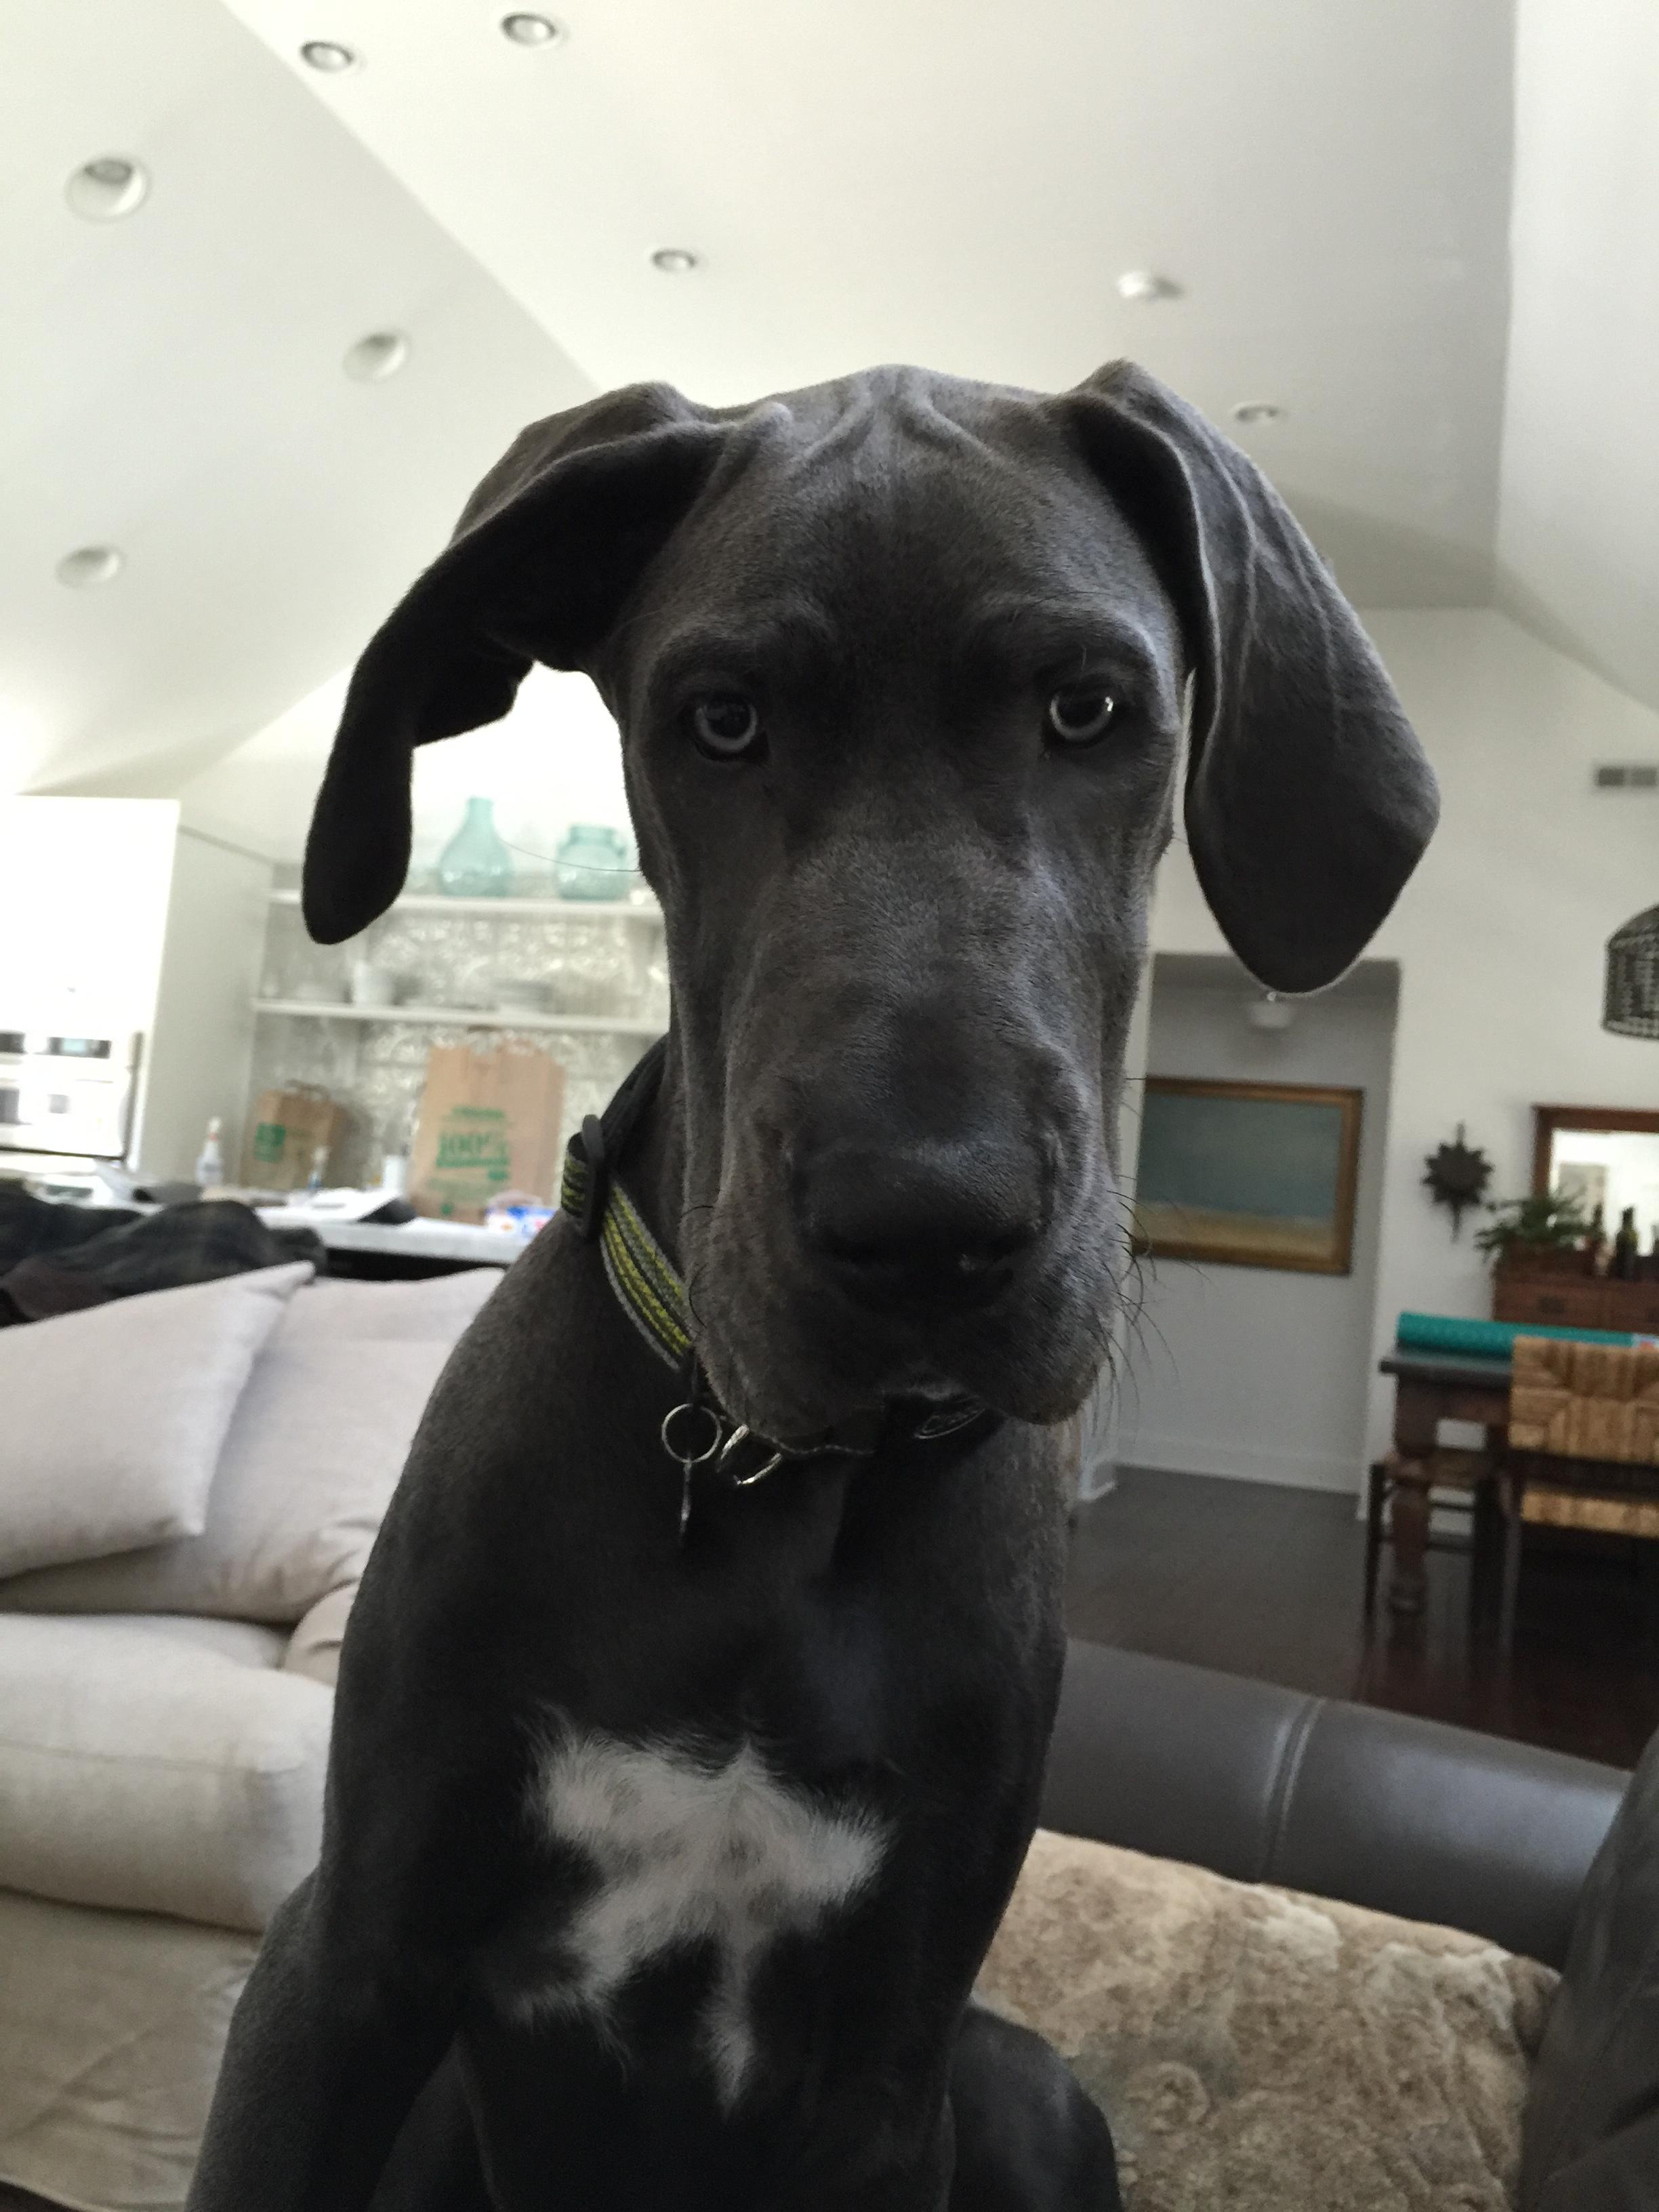 Great Dane sitting on the couch while staring with its grumpy face